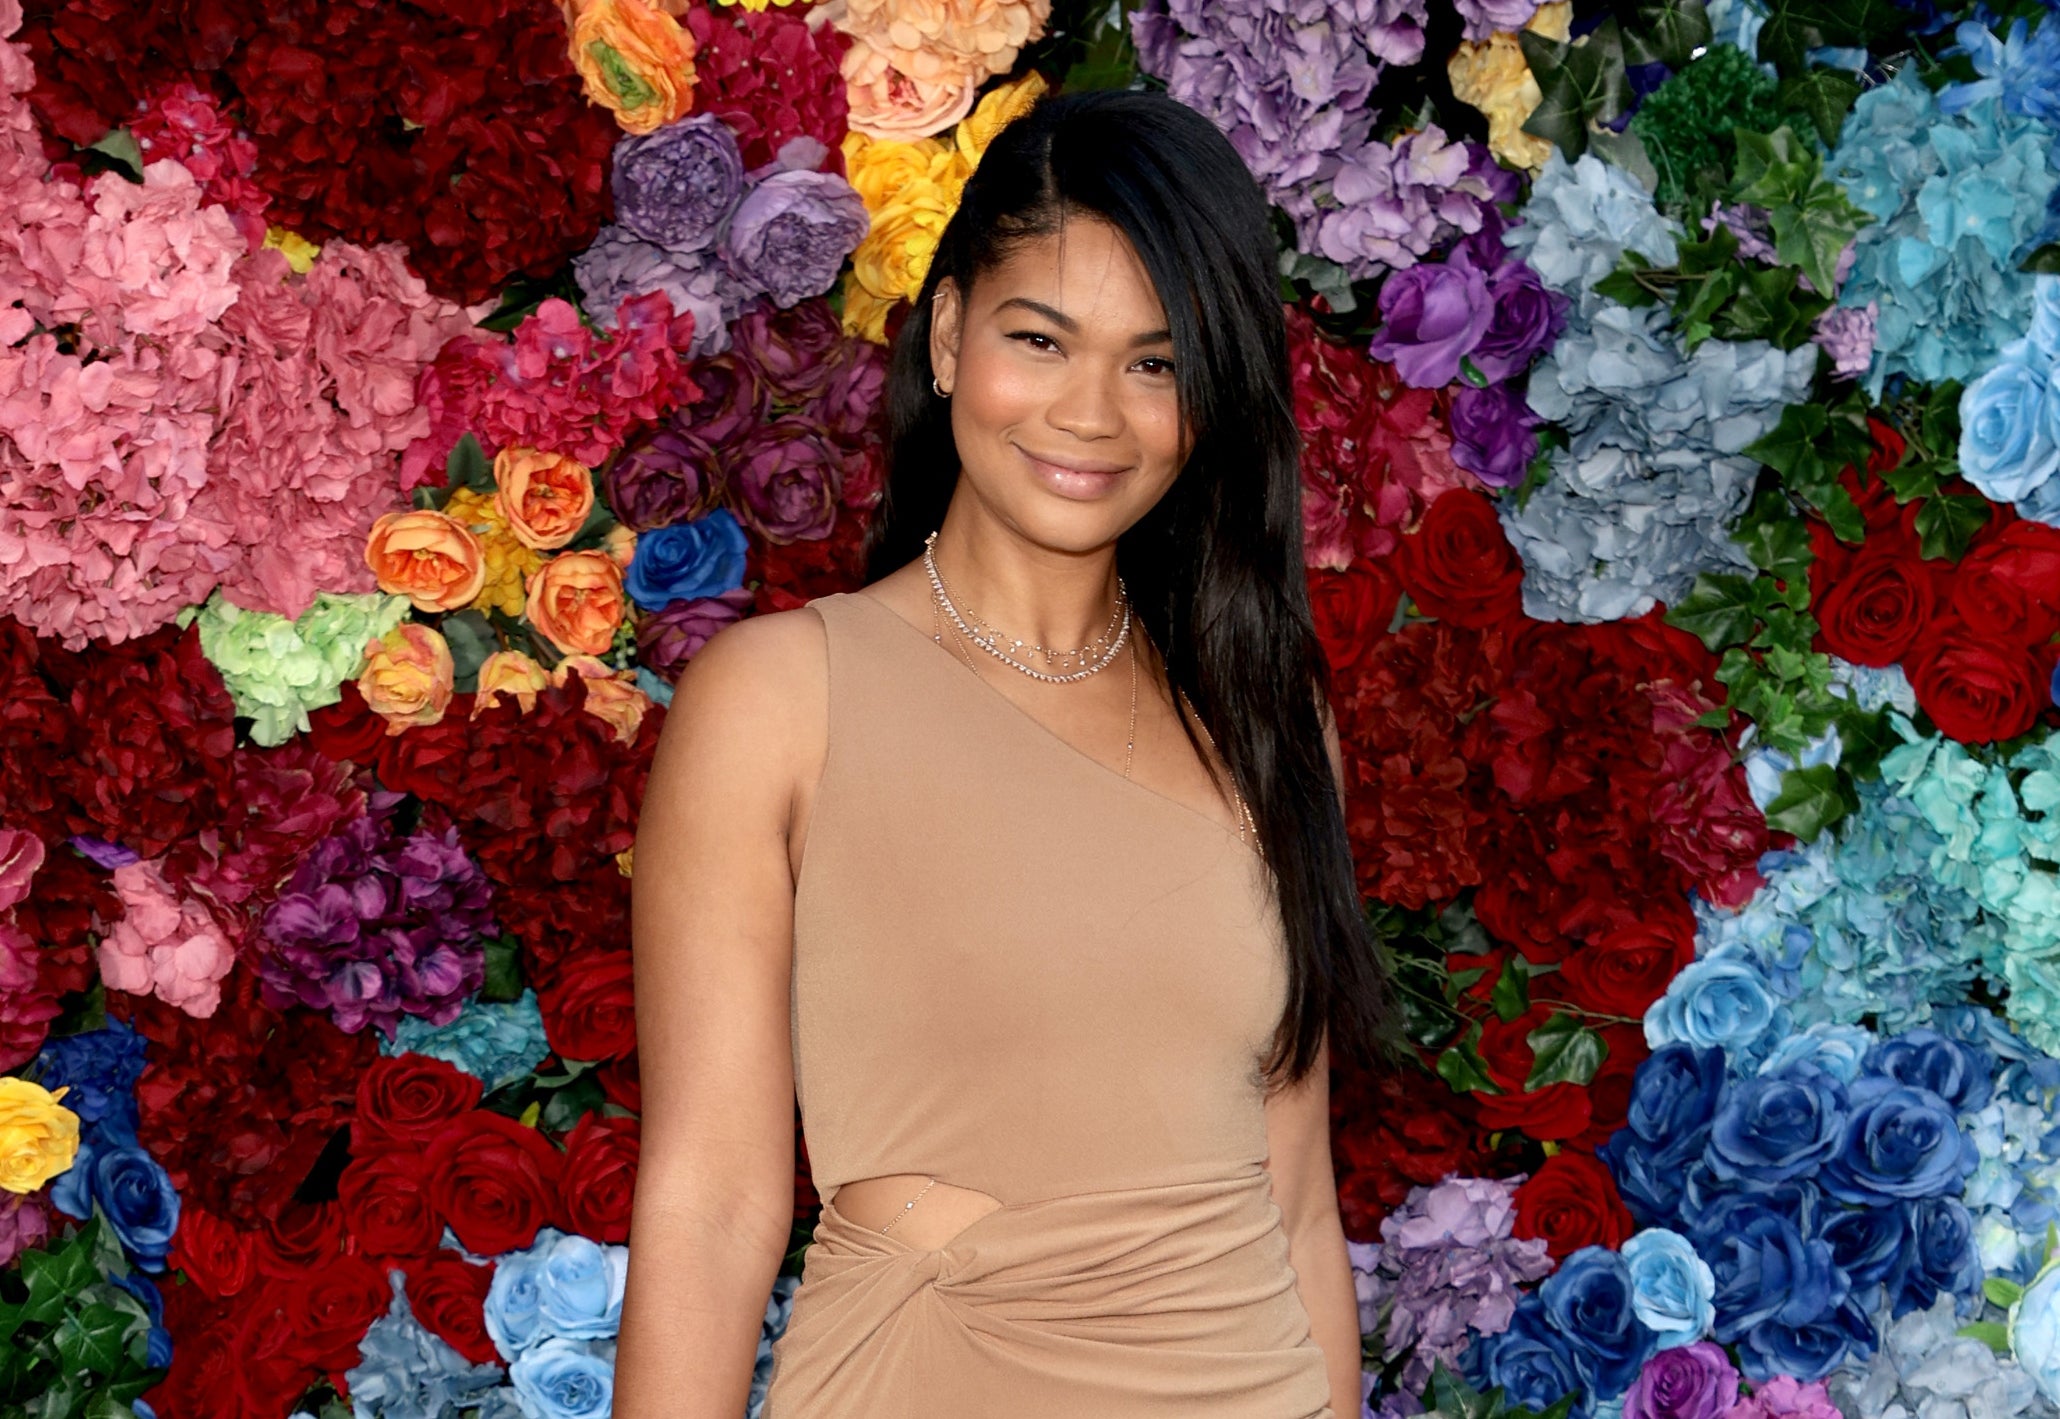 Chanel Iman On Preparing For Her Third Child, Battling Baby Eczema And Finding Love Again With Davon Godchaux